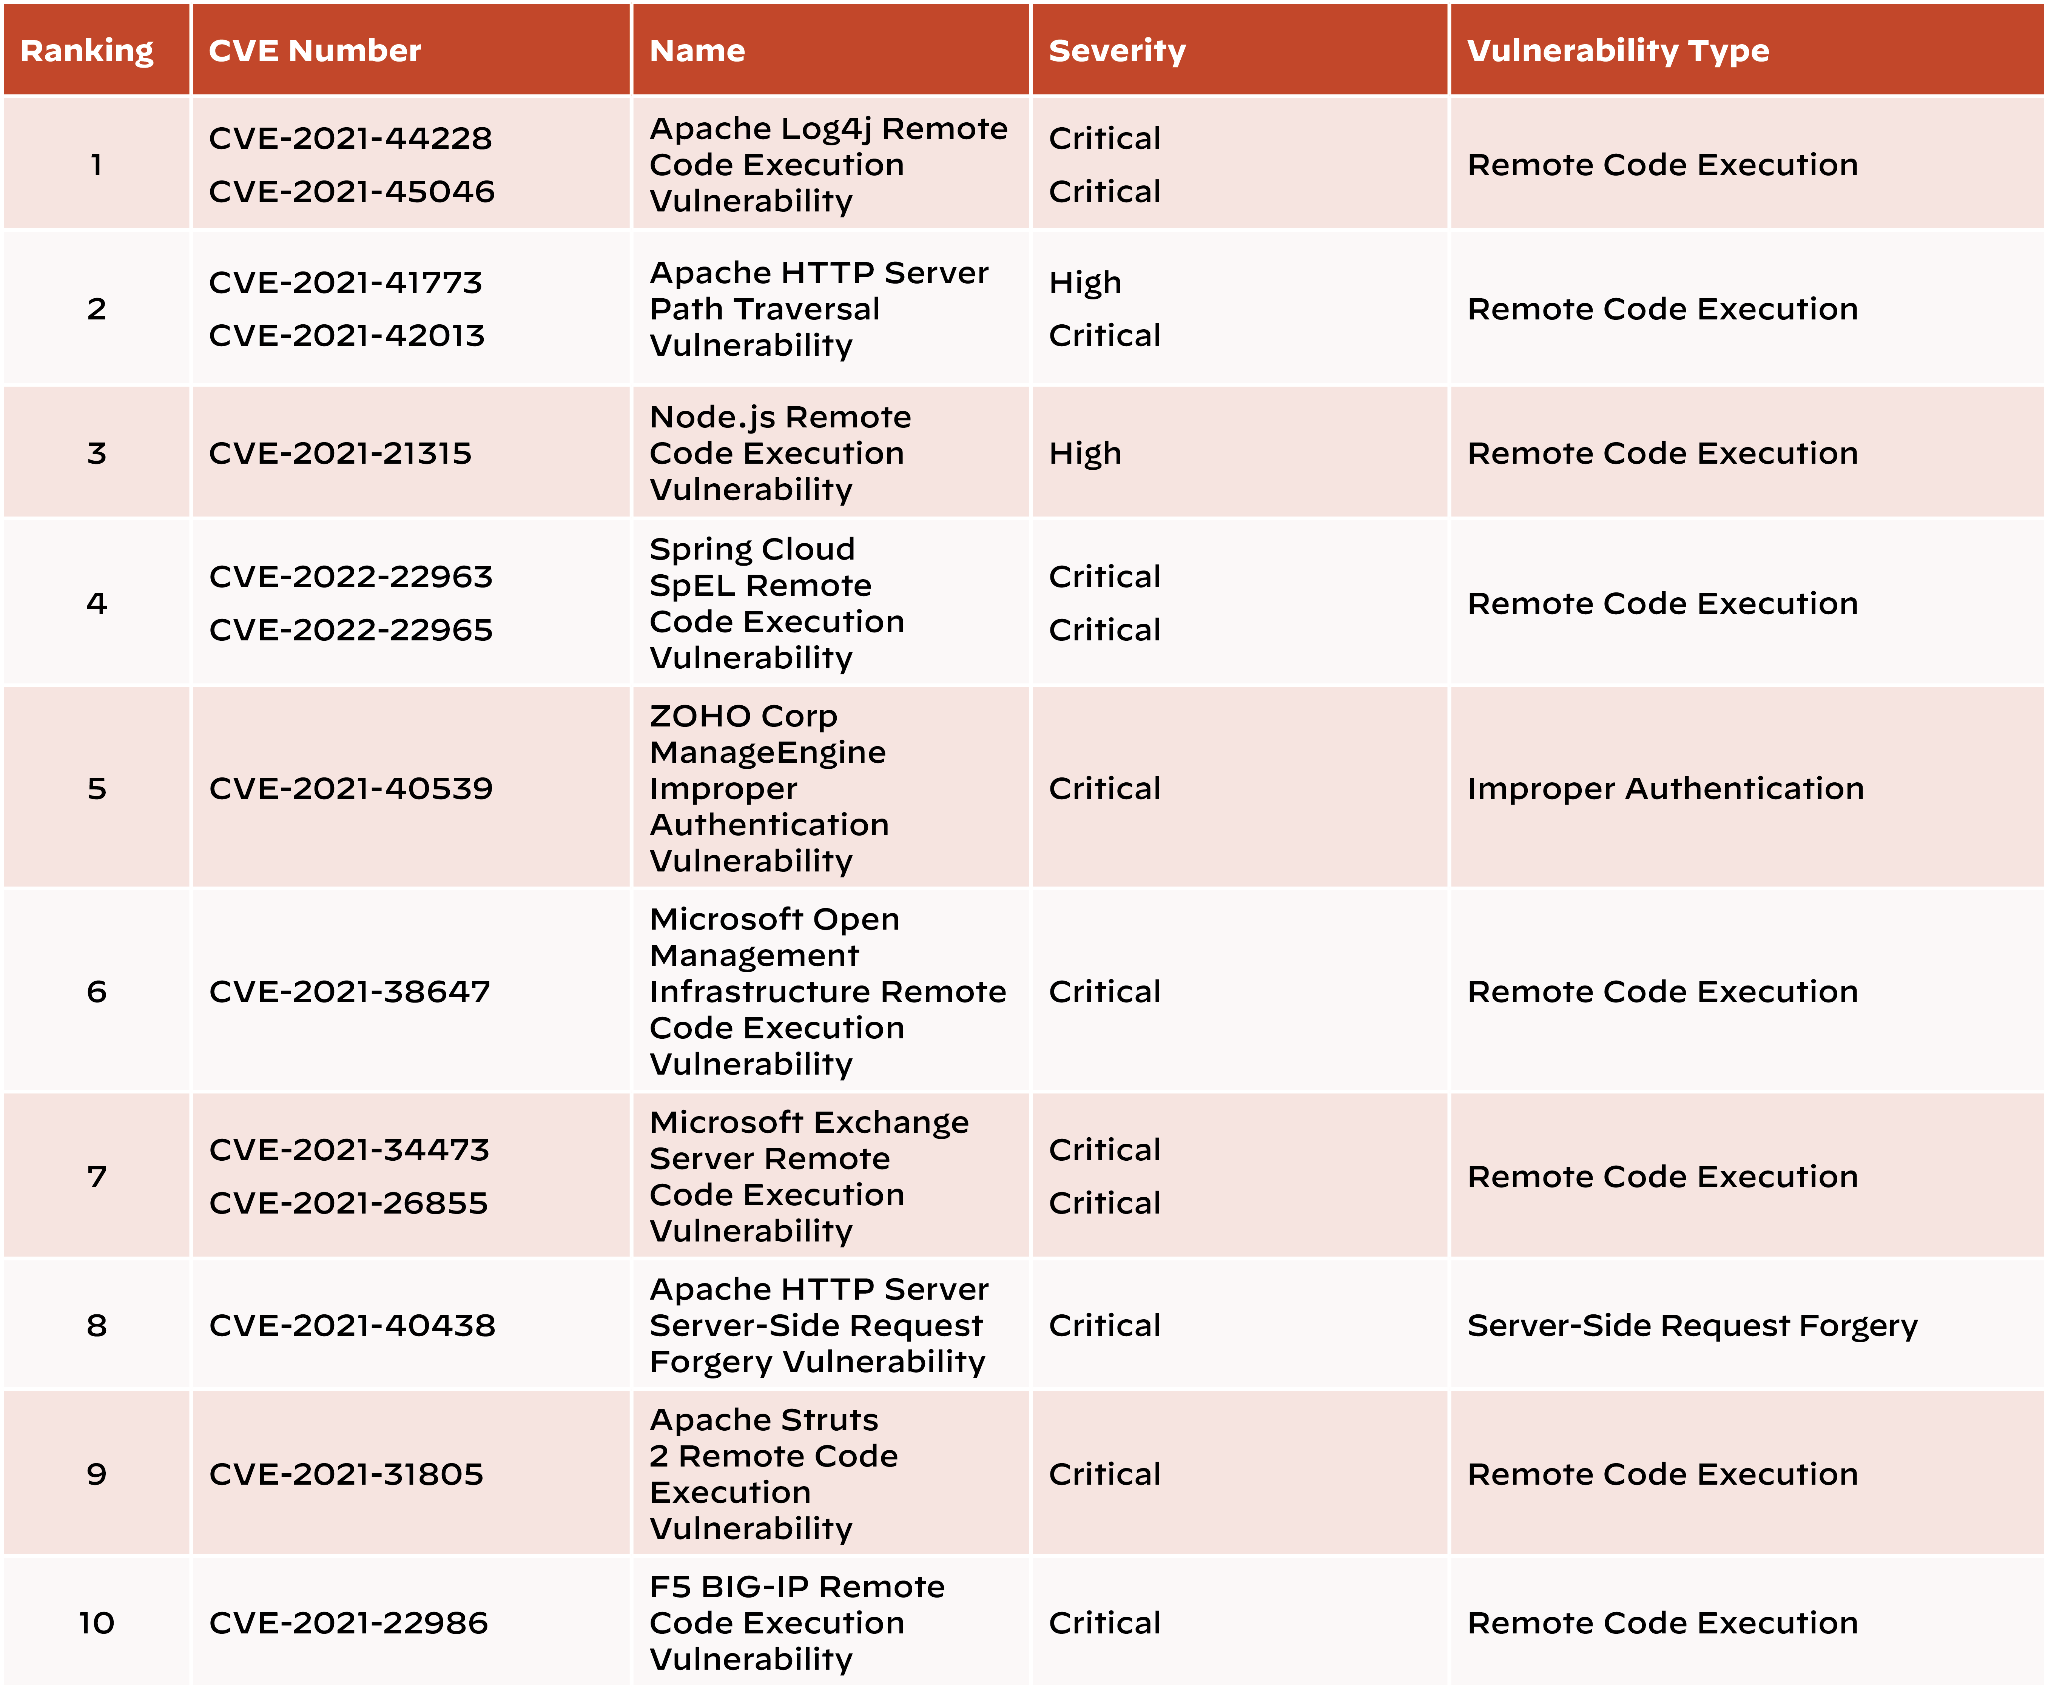 Table shows CVEs predicted as top threats for 2022 and 2023, ranked 1-10. It includes CVE number, name, severity and vulnerability type. In order, CVEs are Apache Log4j Remote Code Execution vulnerability, Apache HTTP Server Path Traversal Vulnerability, Node.js Remote Code Execution Vulnerability, Spring Cloud SpEL Remote Code Execution vulnerability, Zoho Corp Manage Engine Improper Authentication Vulnerability, Microsoft Exchange Server Remote Code Execution Vulnerability, Apache HTTP Server Server-Side Request Forgery Vulnerability, Apache Struts 2 Remote Code Execution Vulnerability, F5 BIG-IP Remote Code Execution Vulnerability